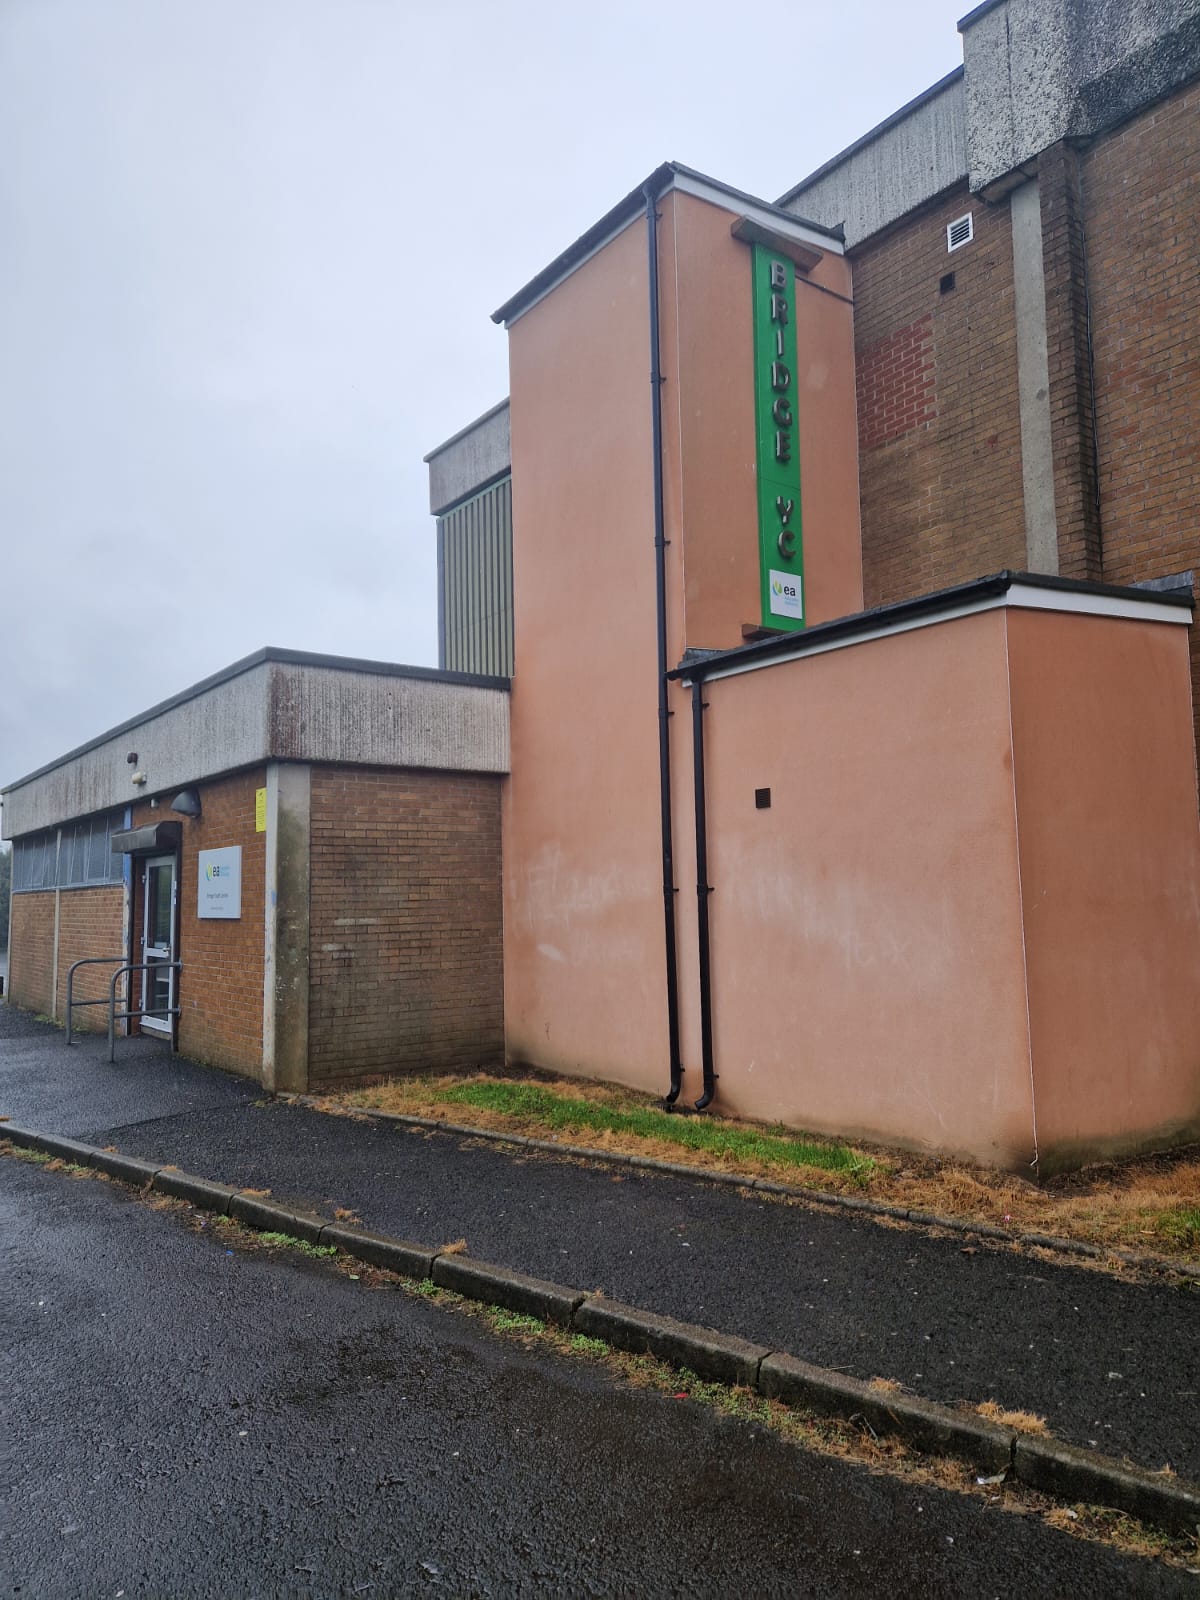 Front of Bridge Youth Centre. The building is painted orange with a green sign saying "Bridge Youth Centre"